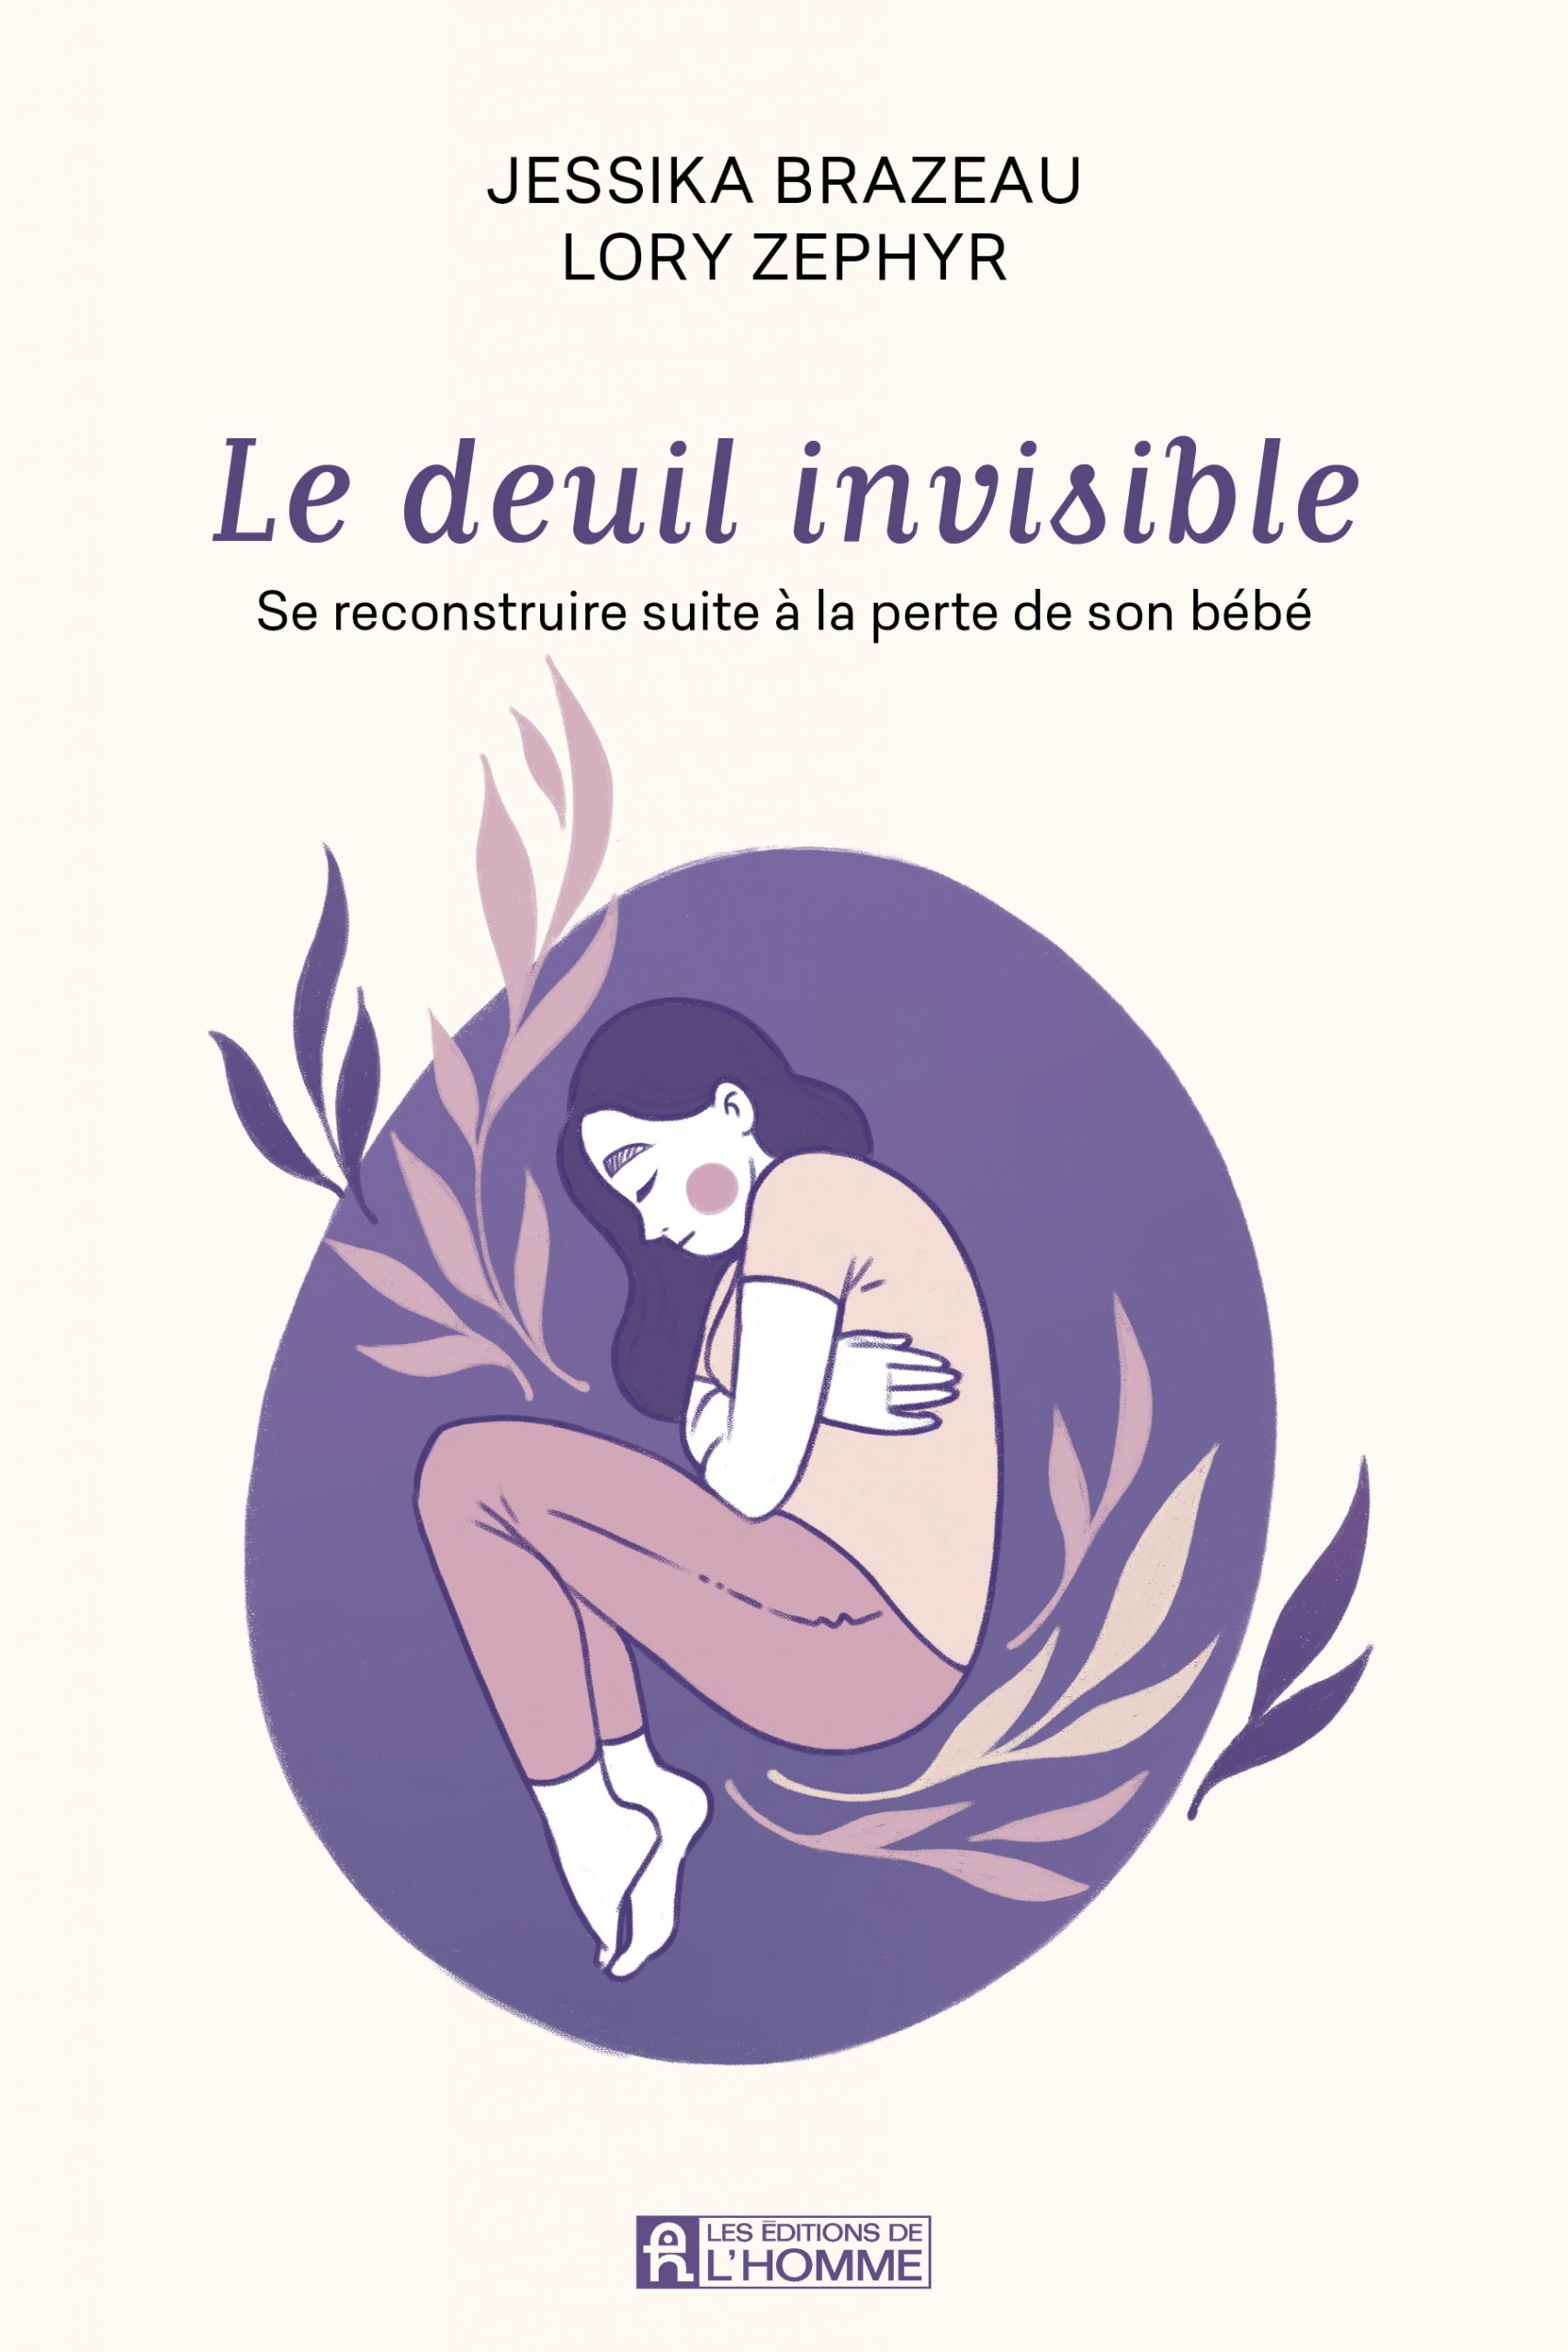 Le deuil invisible